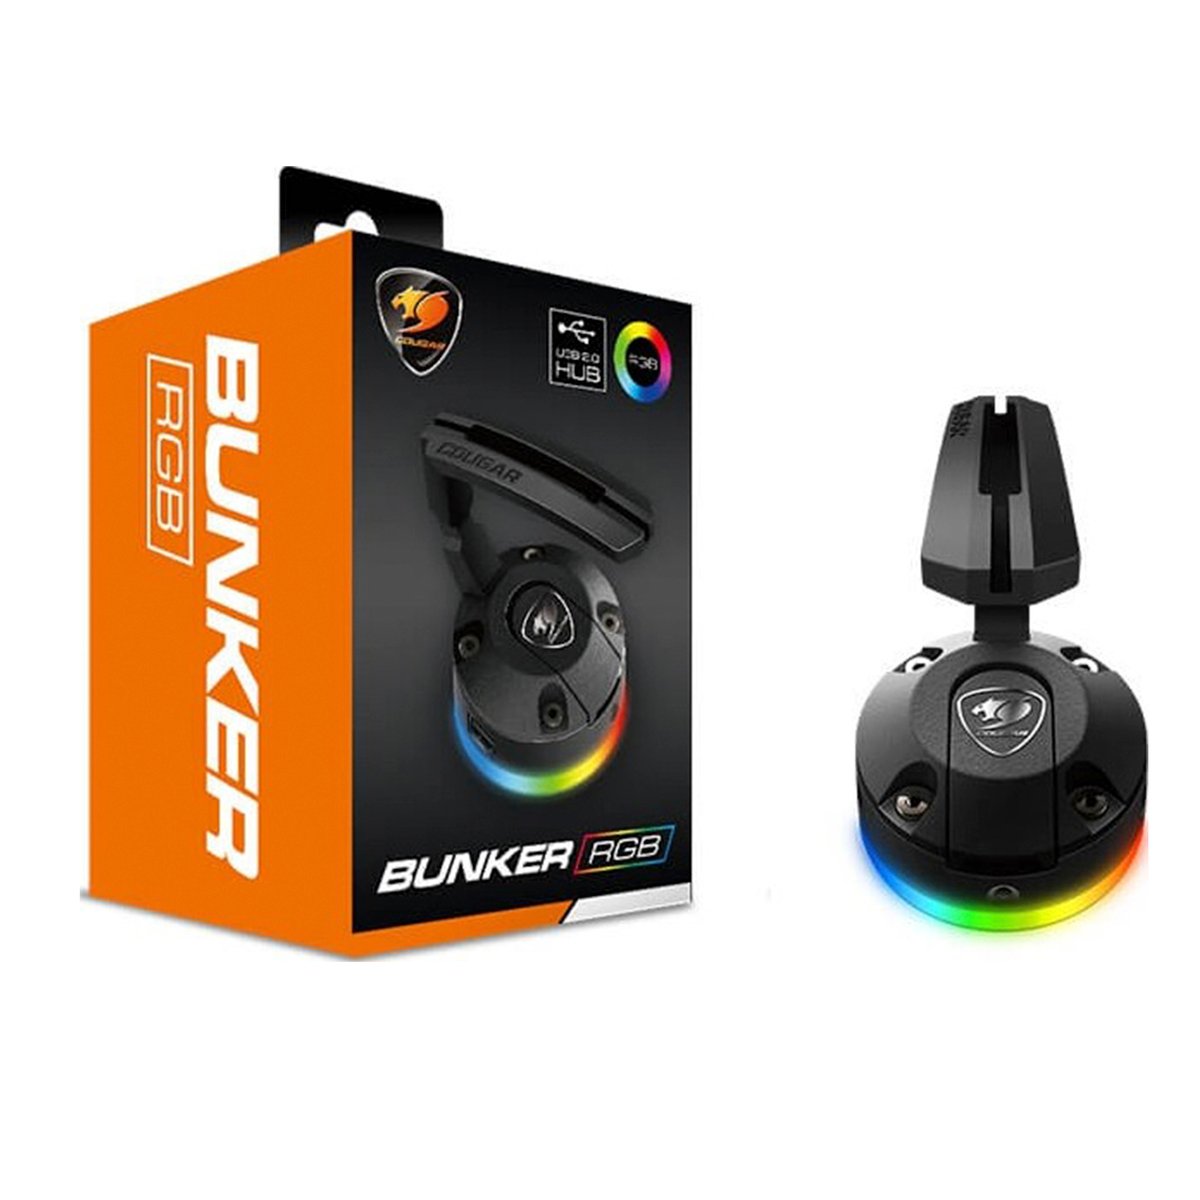 Cougar Bunker RGB Gaming Mouse Bungee with USB Hub CG-MB